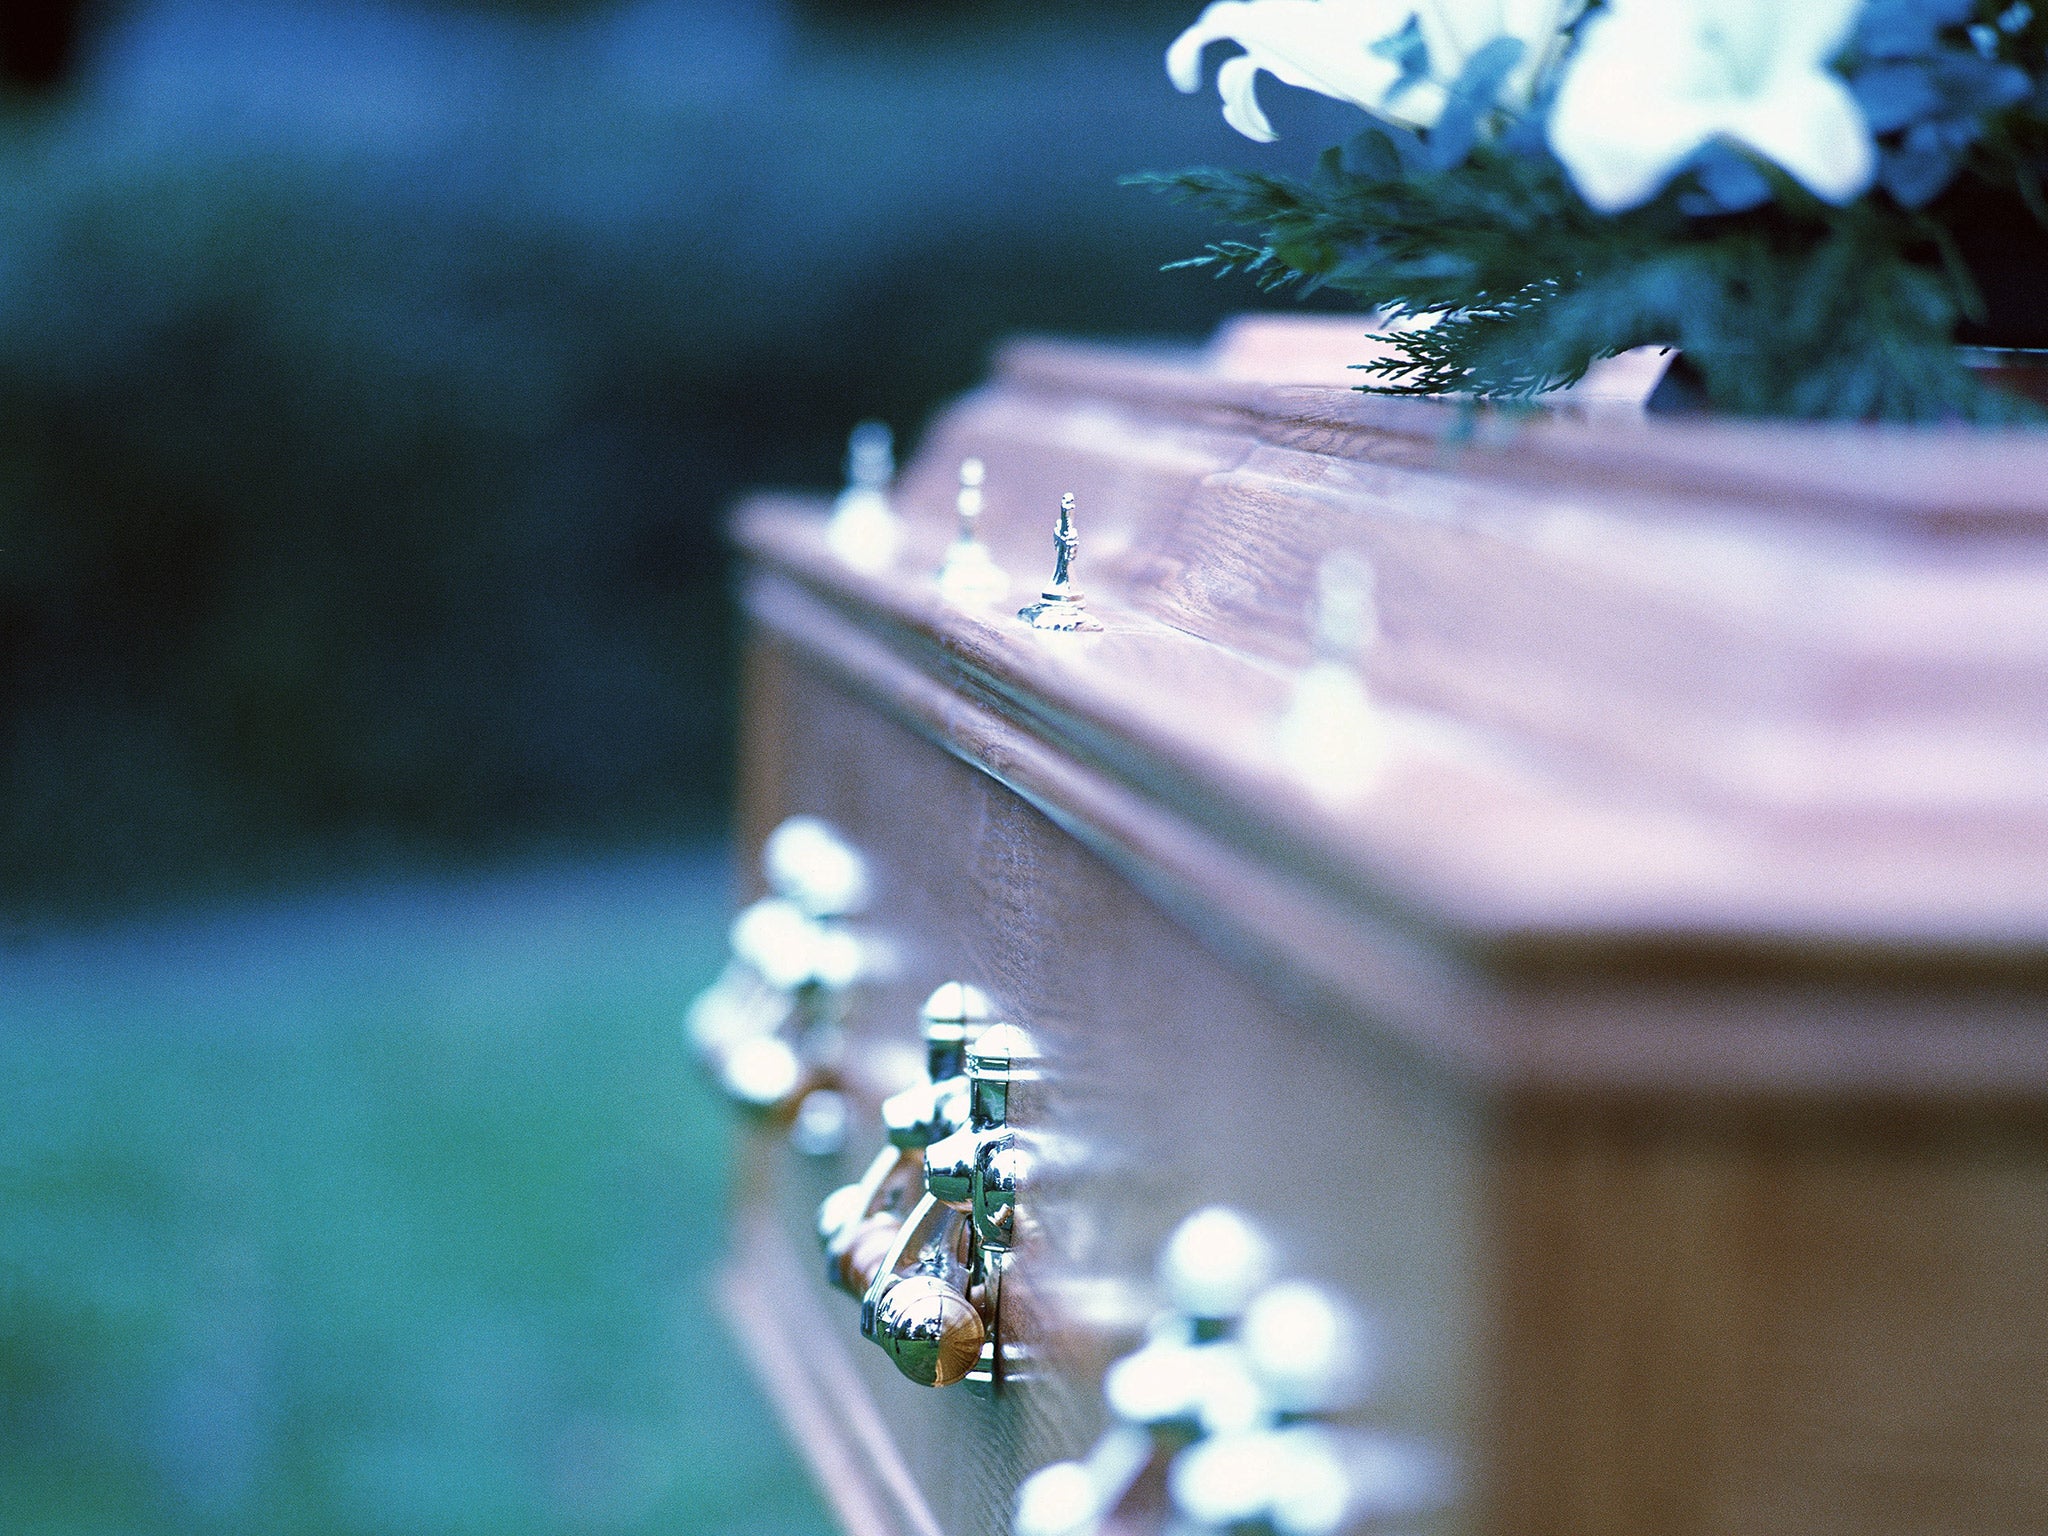 The average price of a funeral was £3,700 last year